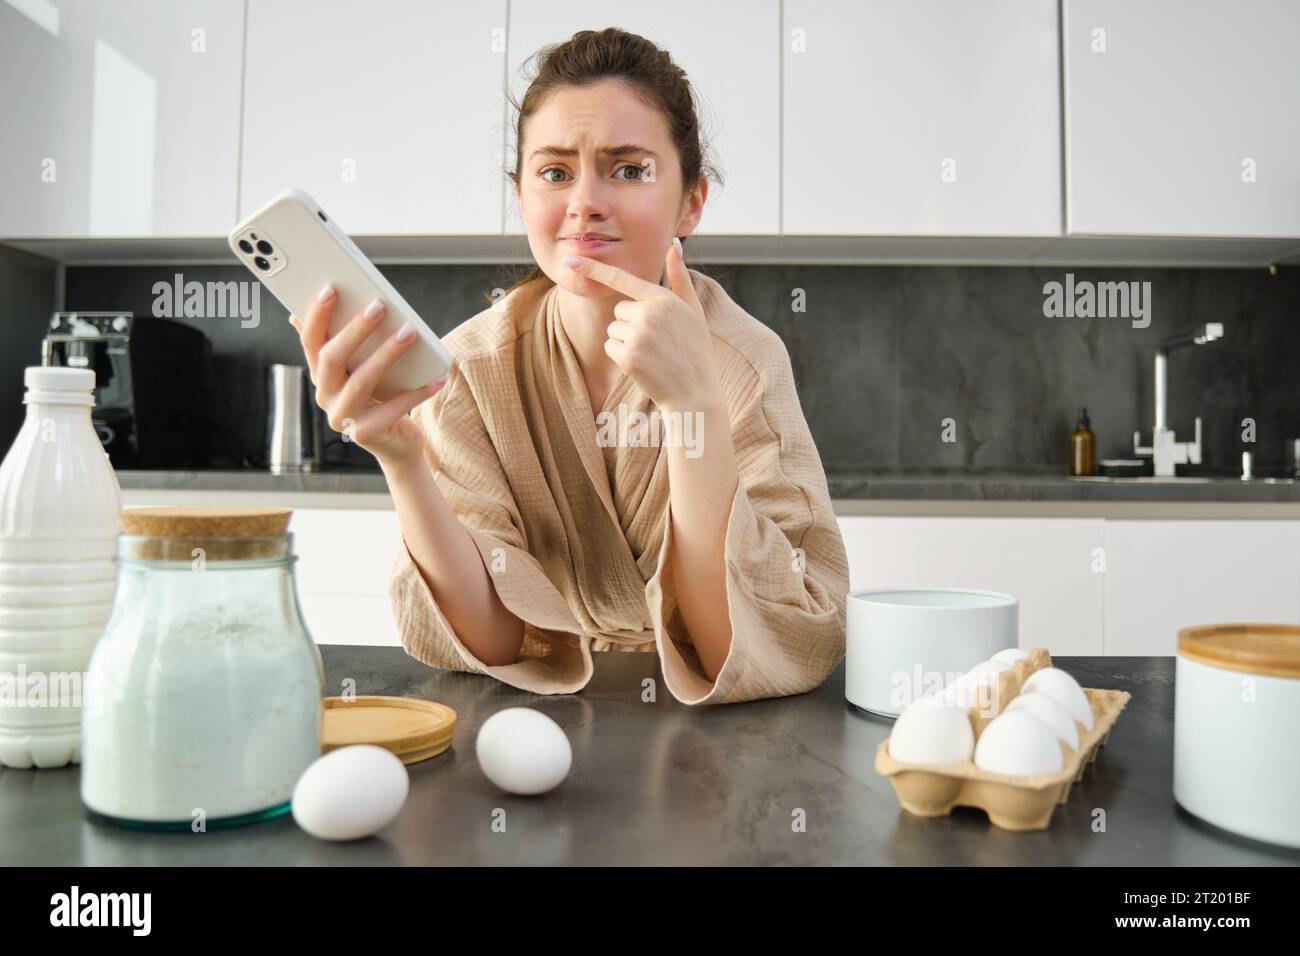 Attractive young cheerful girl baking at the kitchen, making dough, holding recipe book, having ideas. Stock Photo